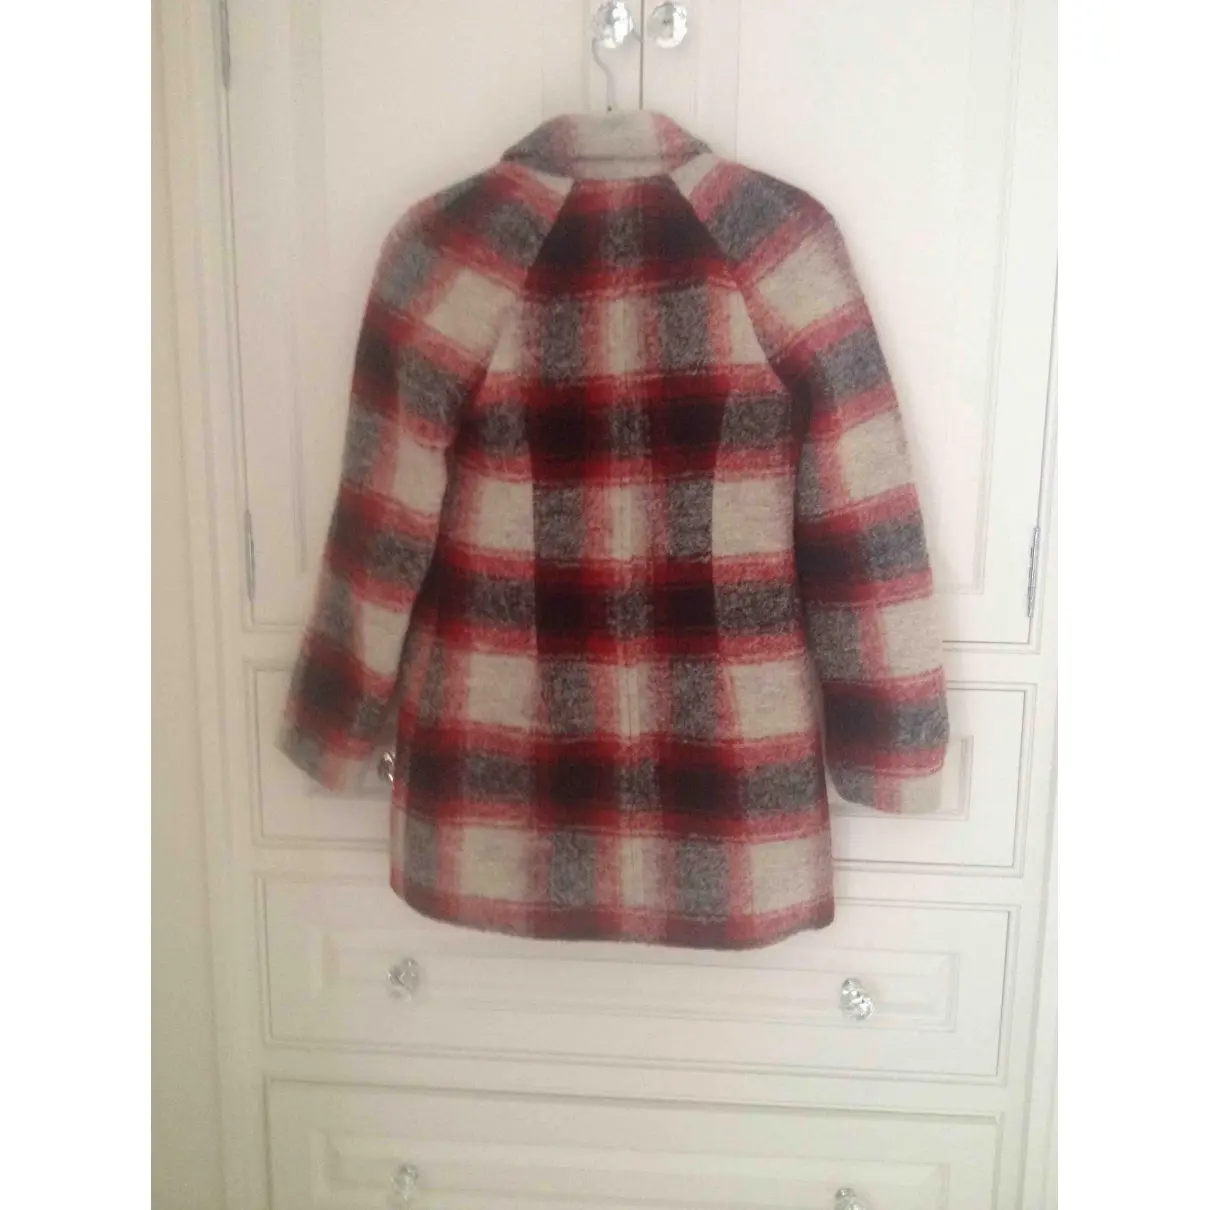 Madewell Wool coat for sale